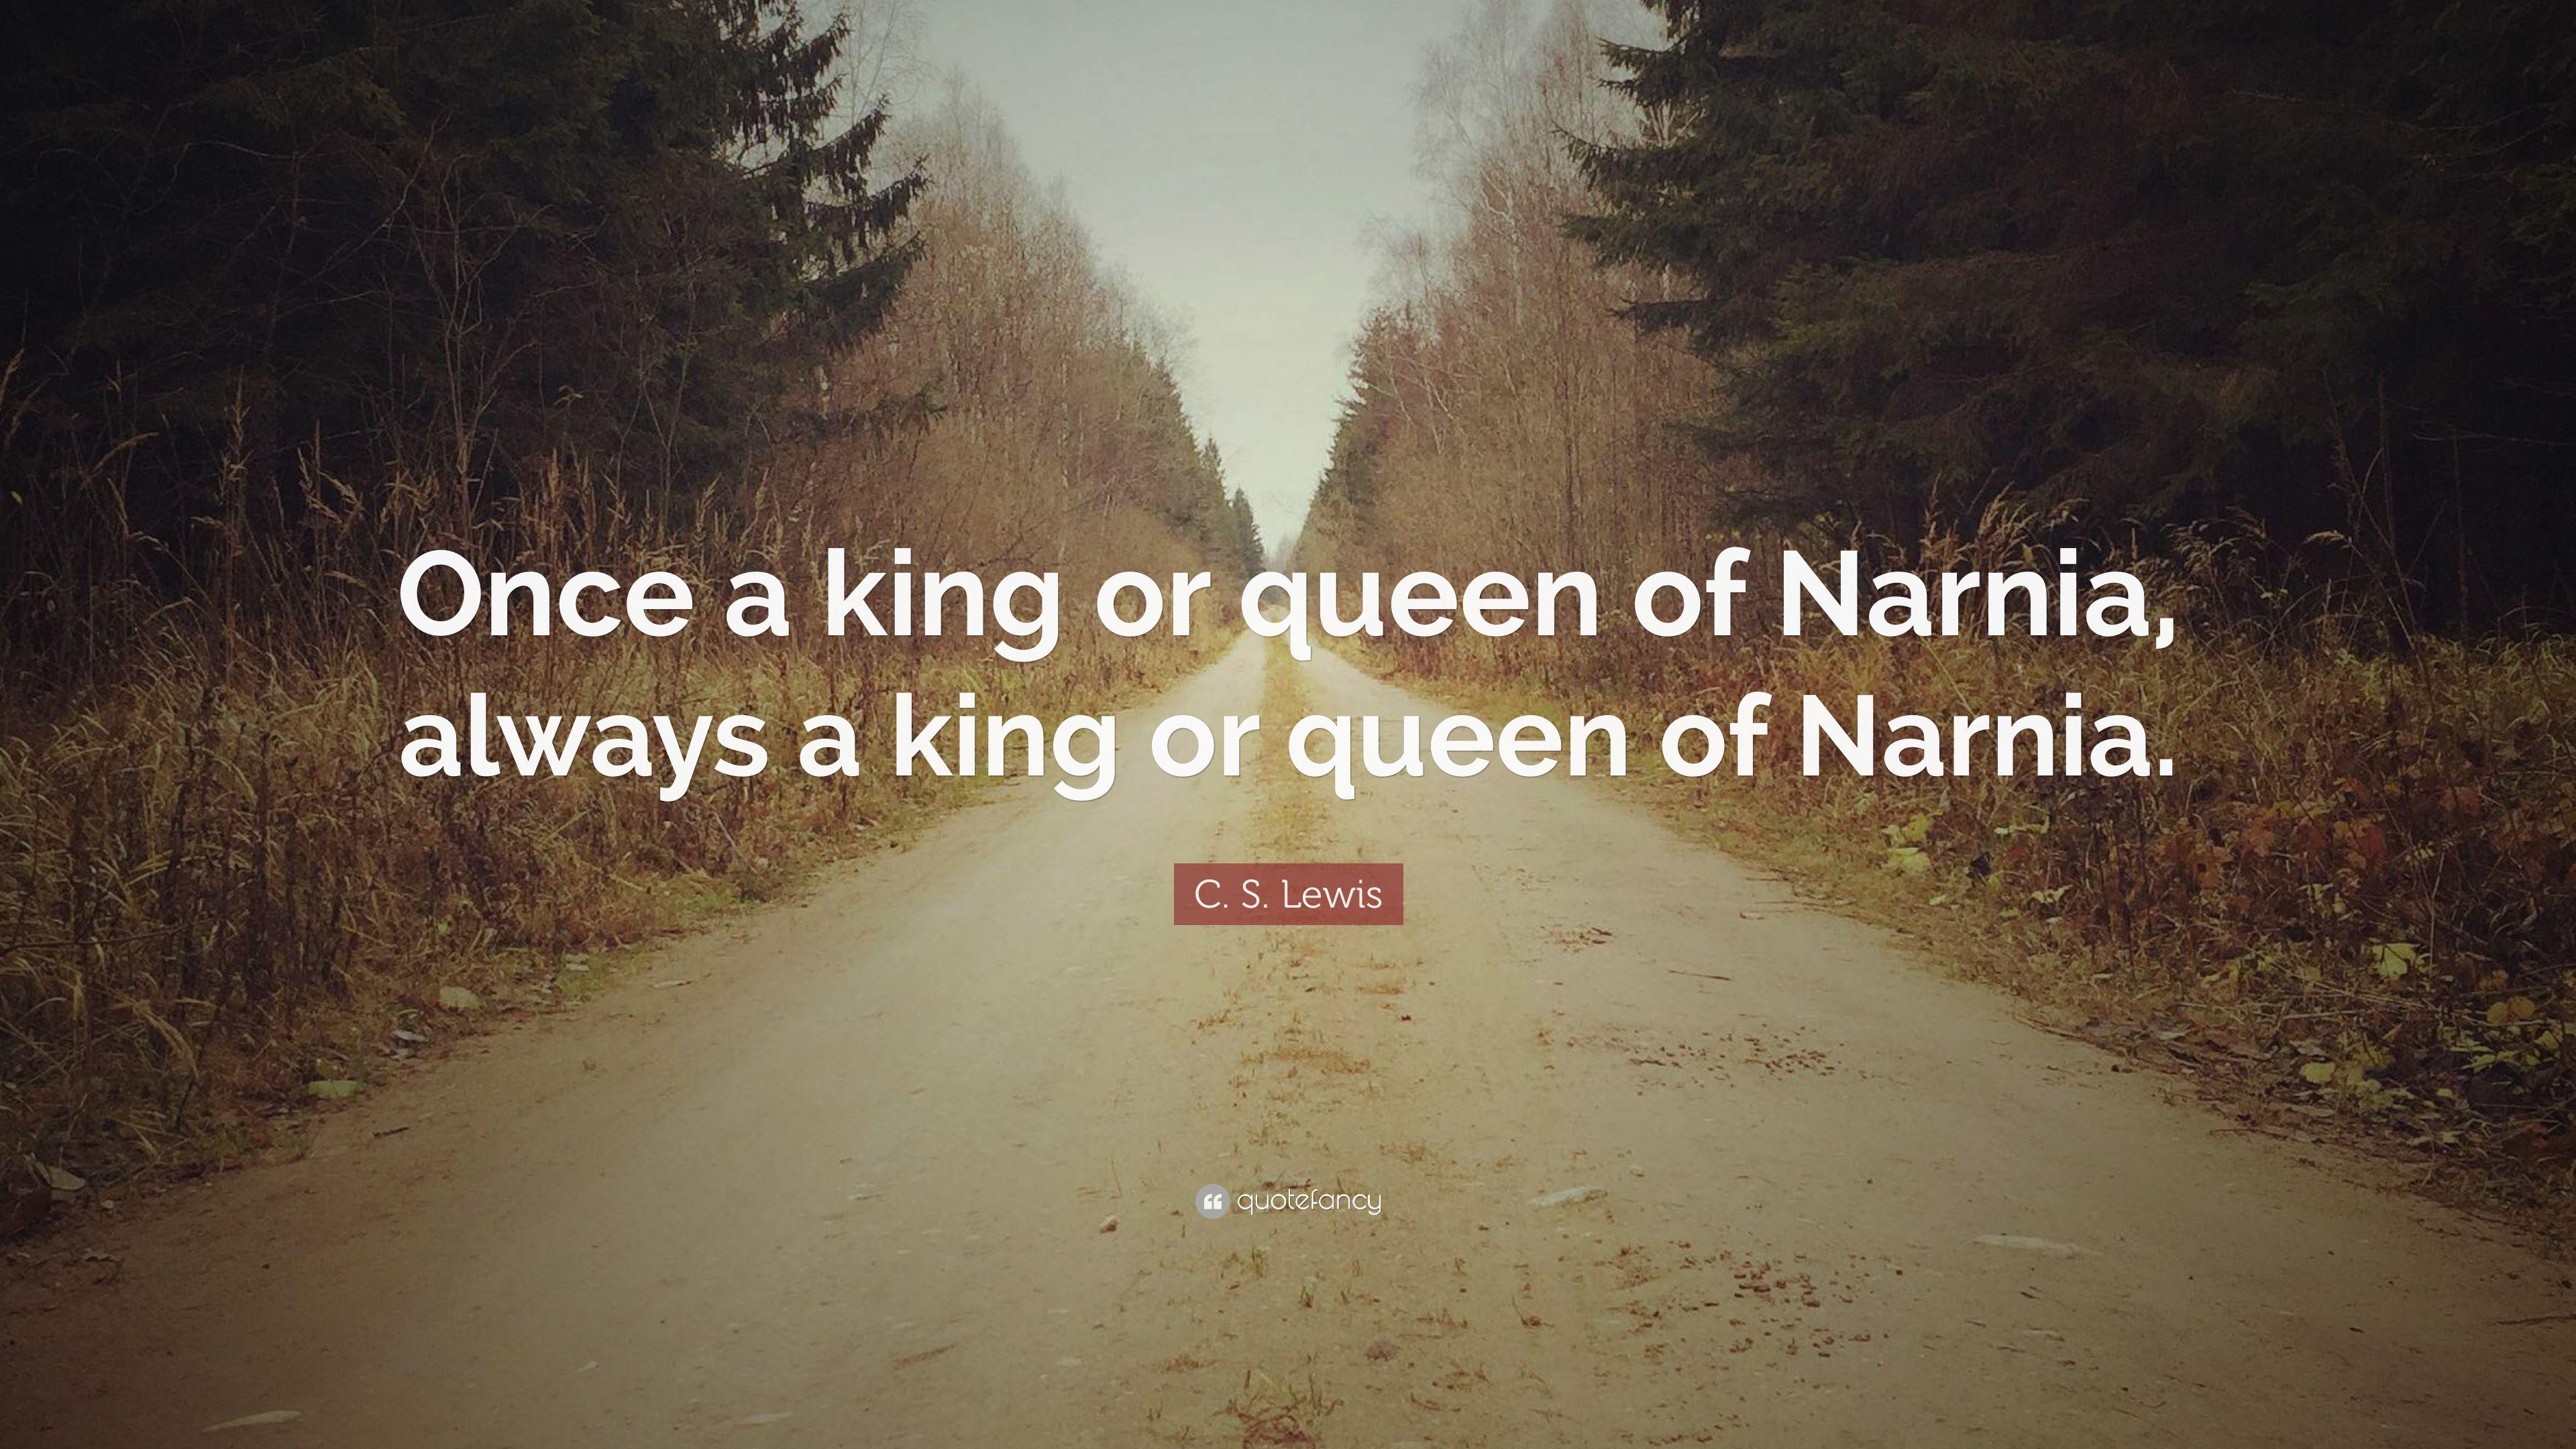 C. S. Lewis Quote: “Once a king or queen of Narnia, always a king or